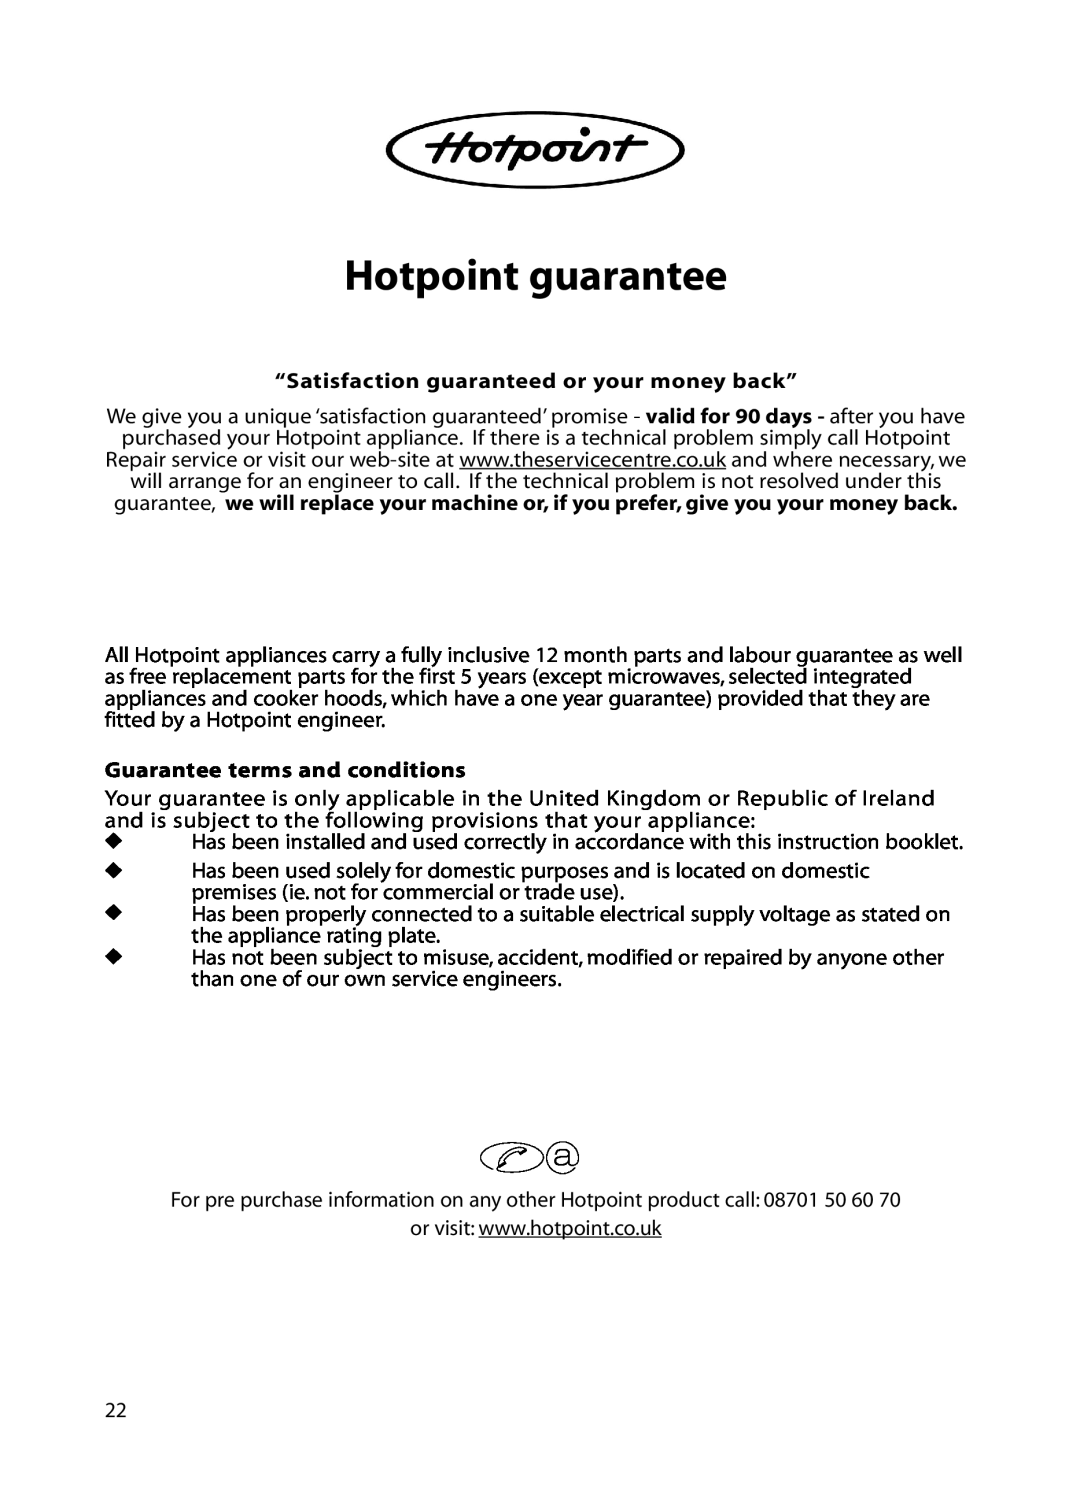 Hotpoint BE82 manual Hotpoint guarantee, “Satisfaction guaranteed or your money back”, Guarantee terms and conditions 